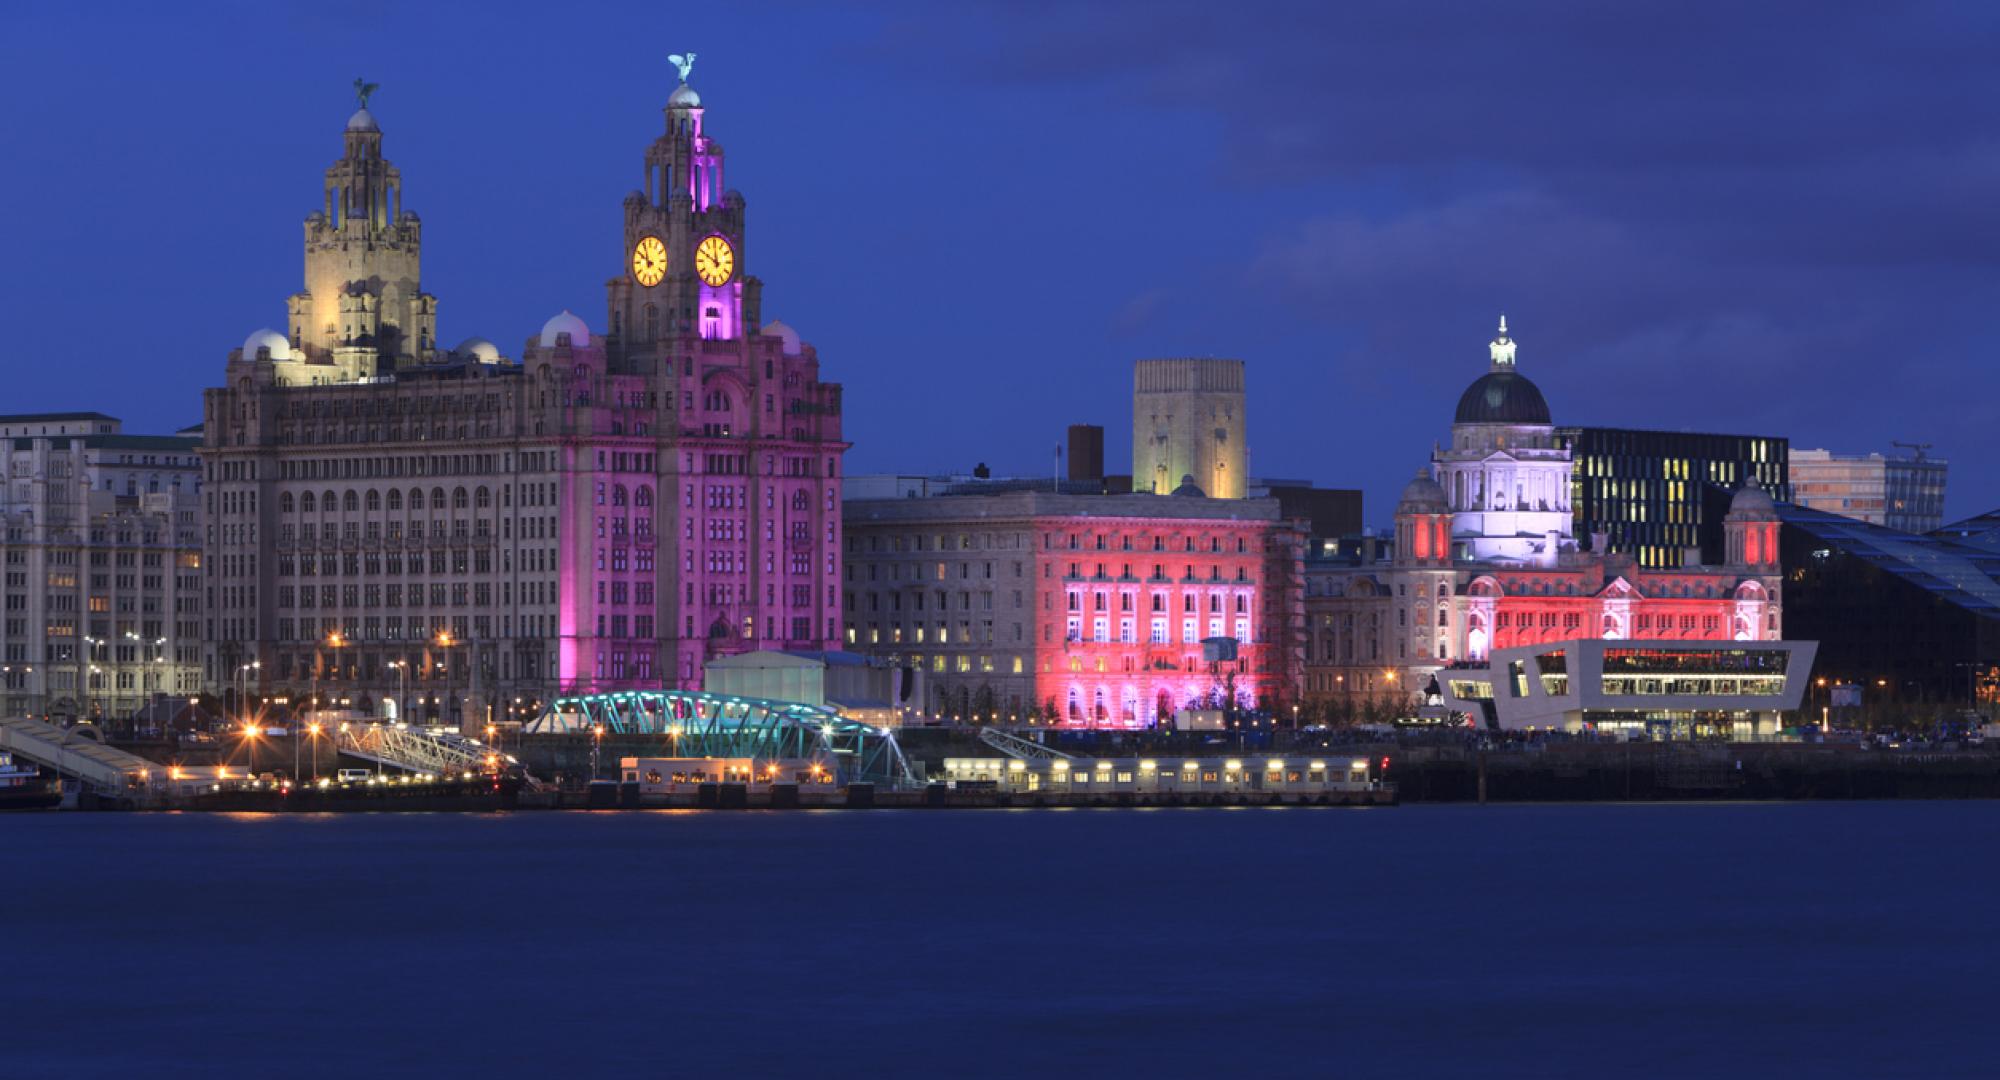 Liverpool at night with the Liver building lit